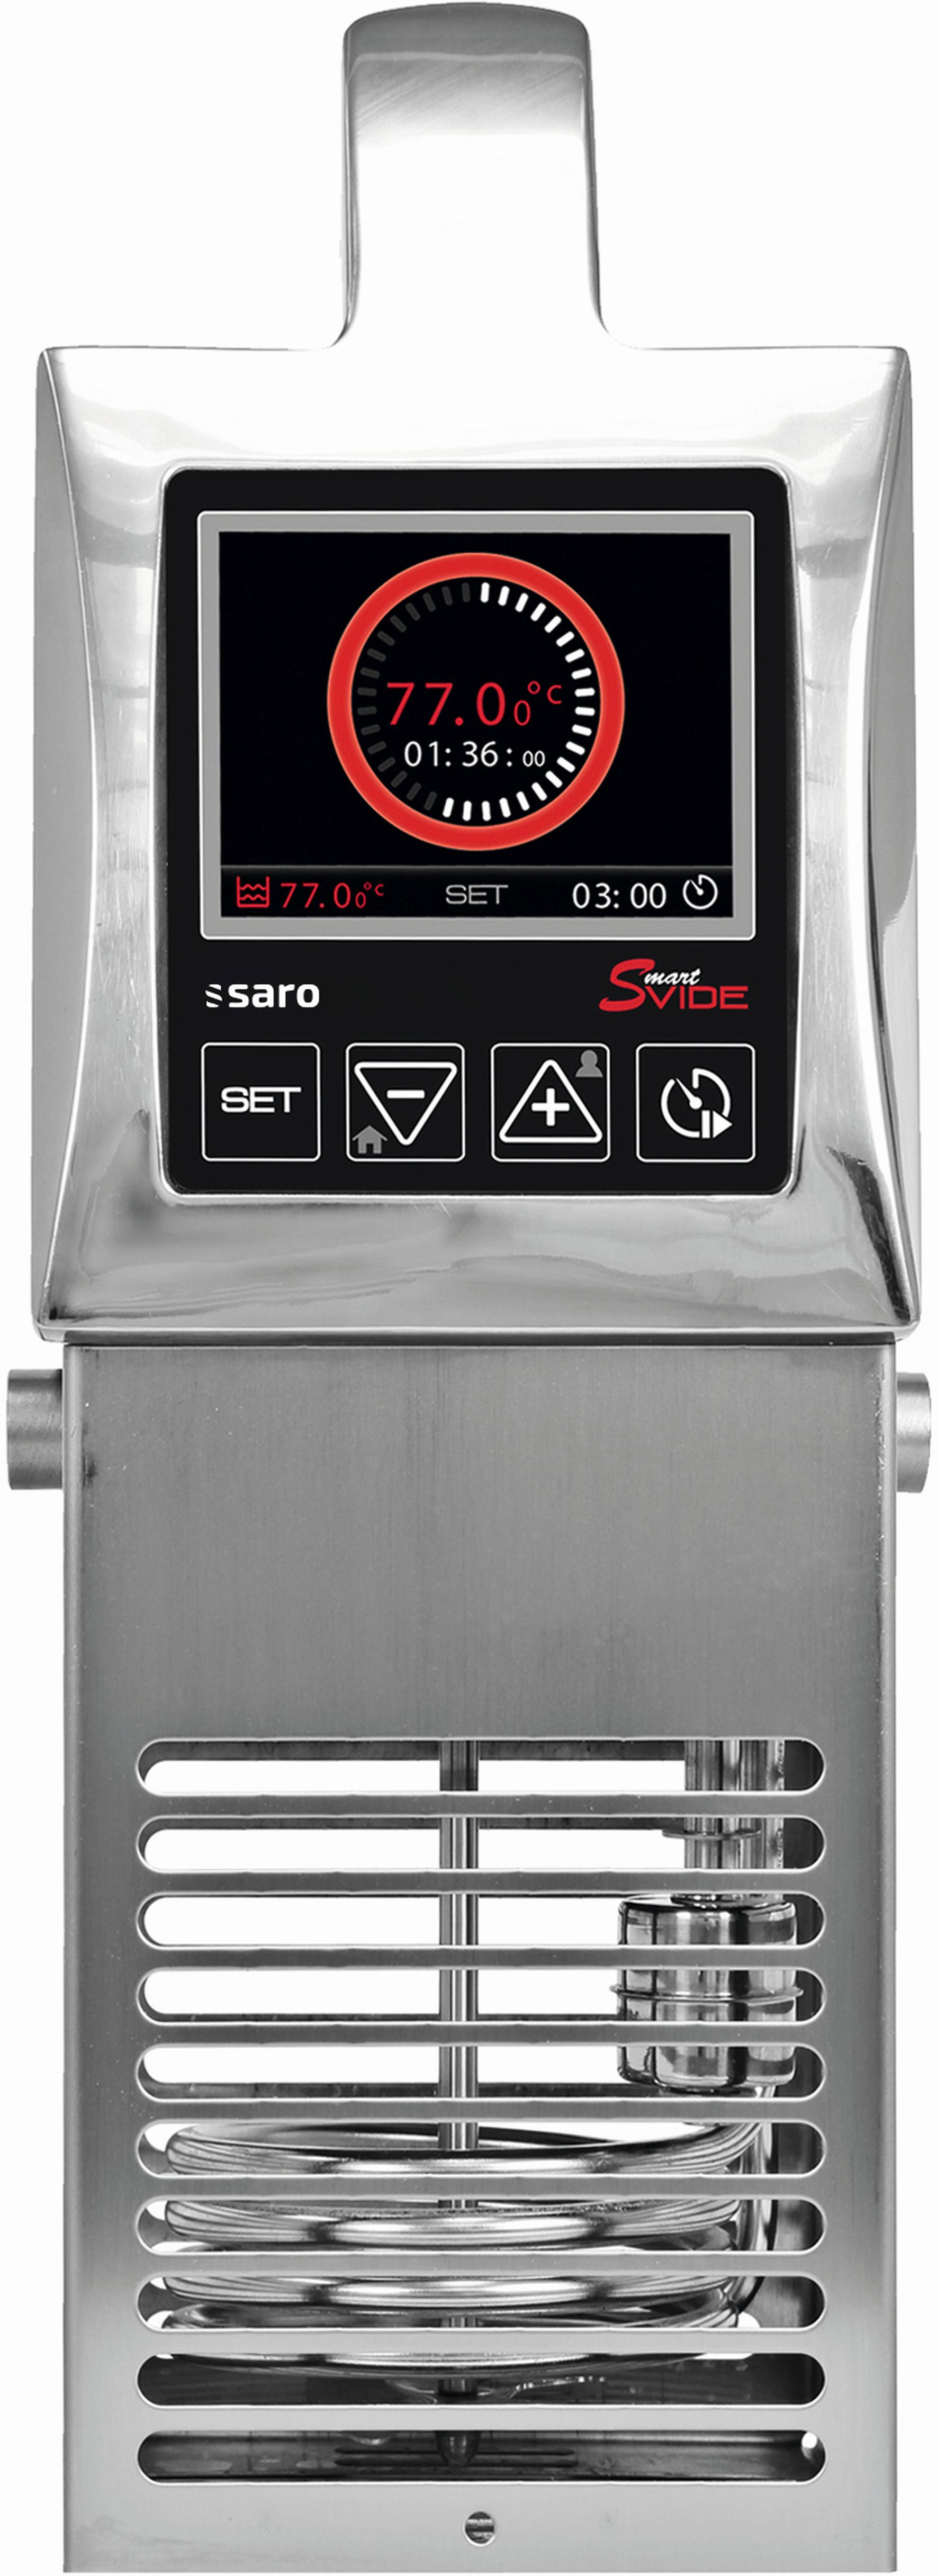 SARO sous vide cooker SmartVide 9 with Bluetooth interface